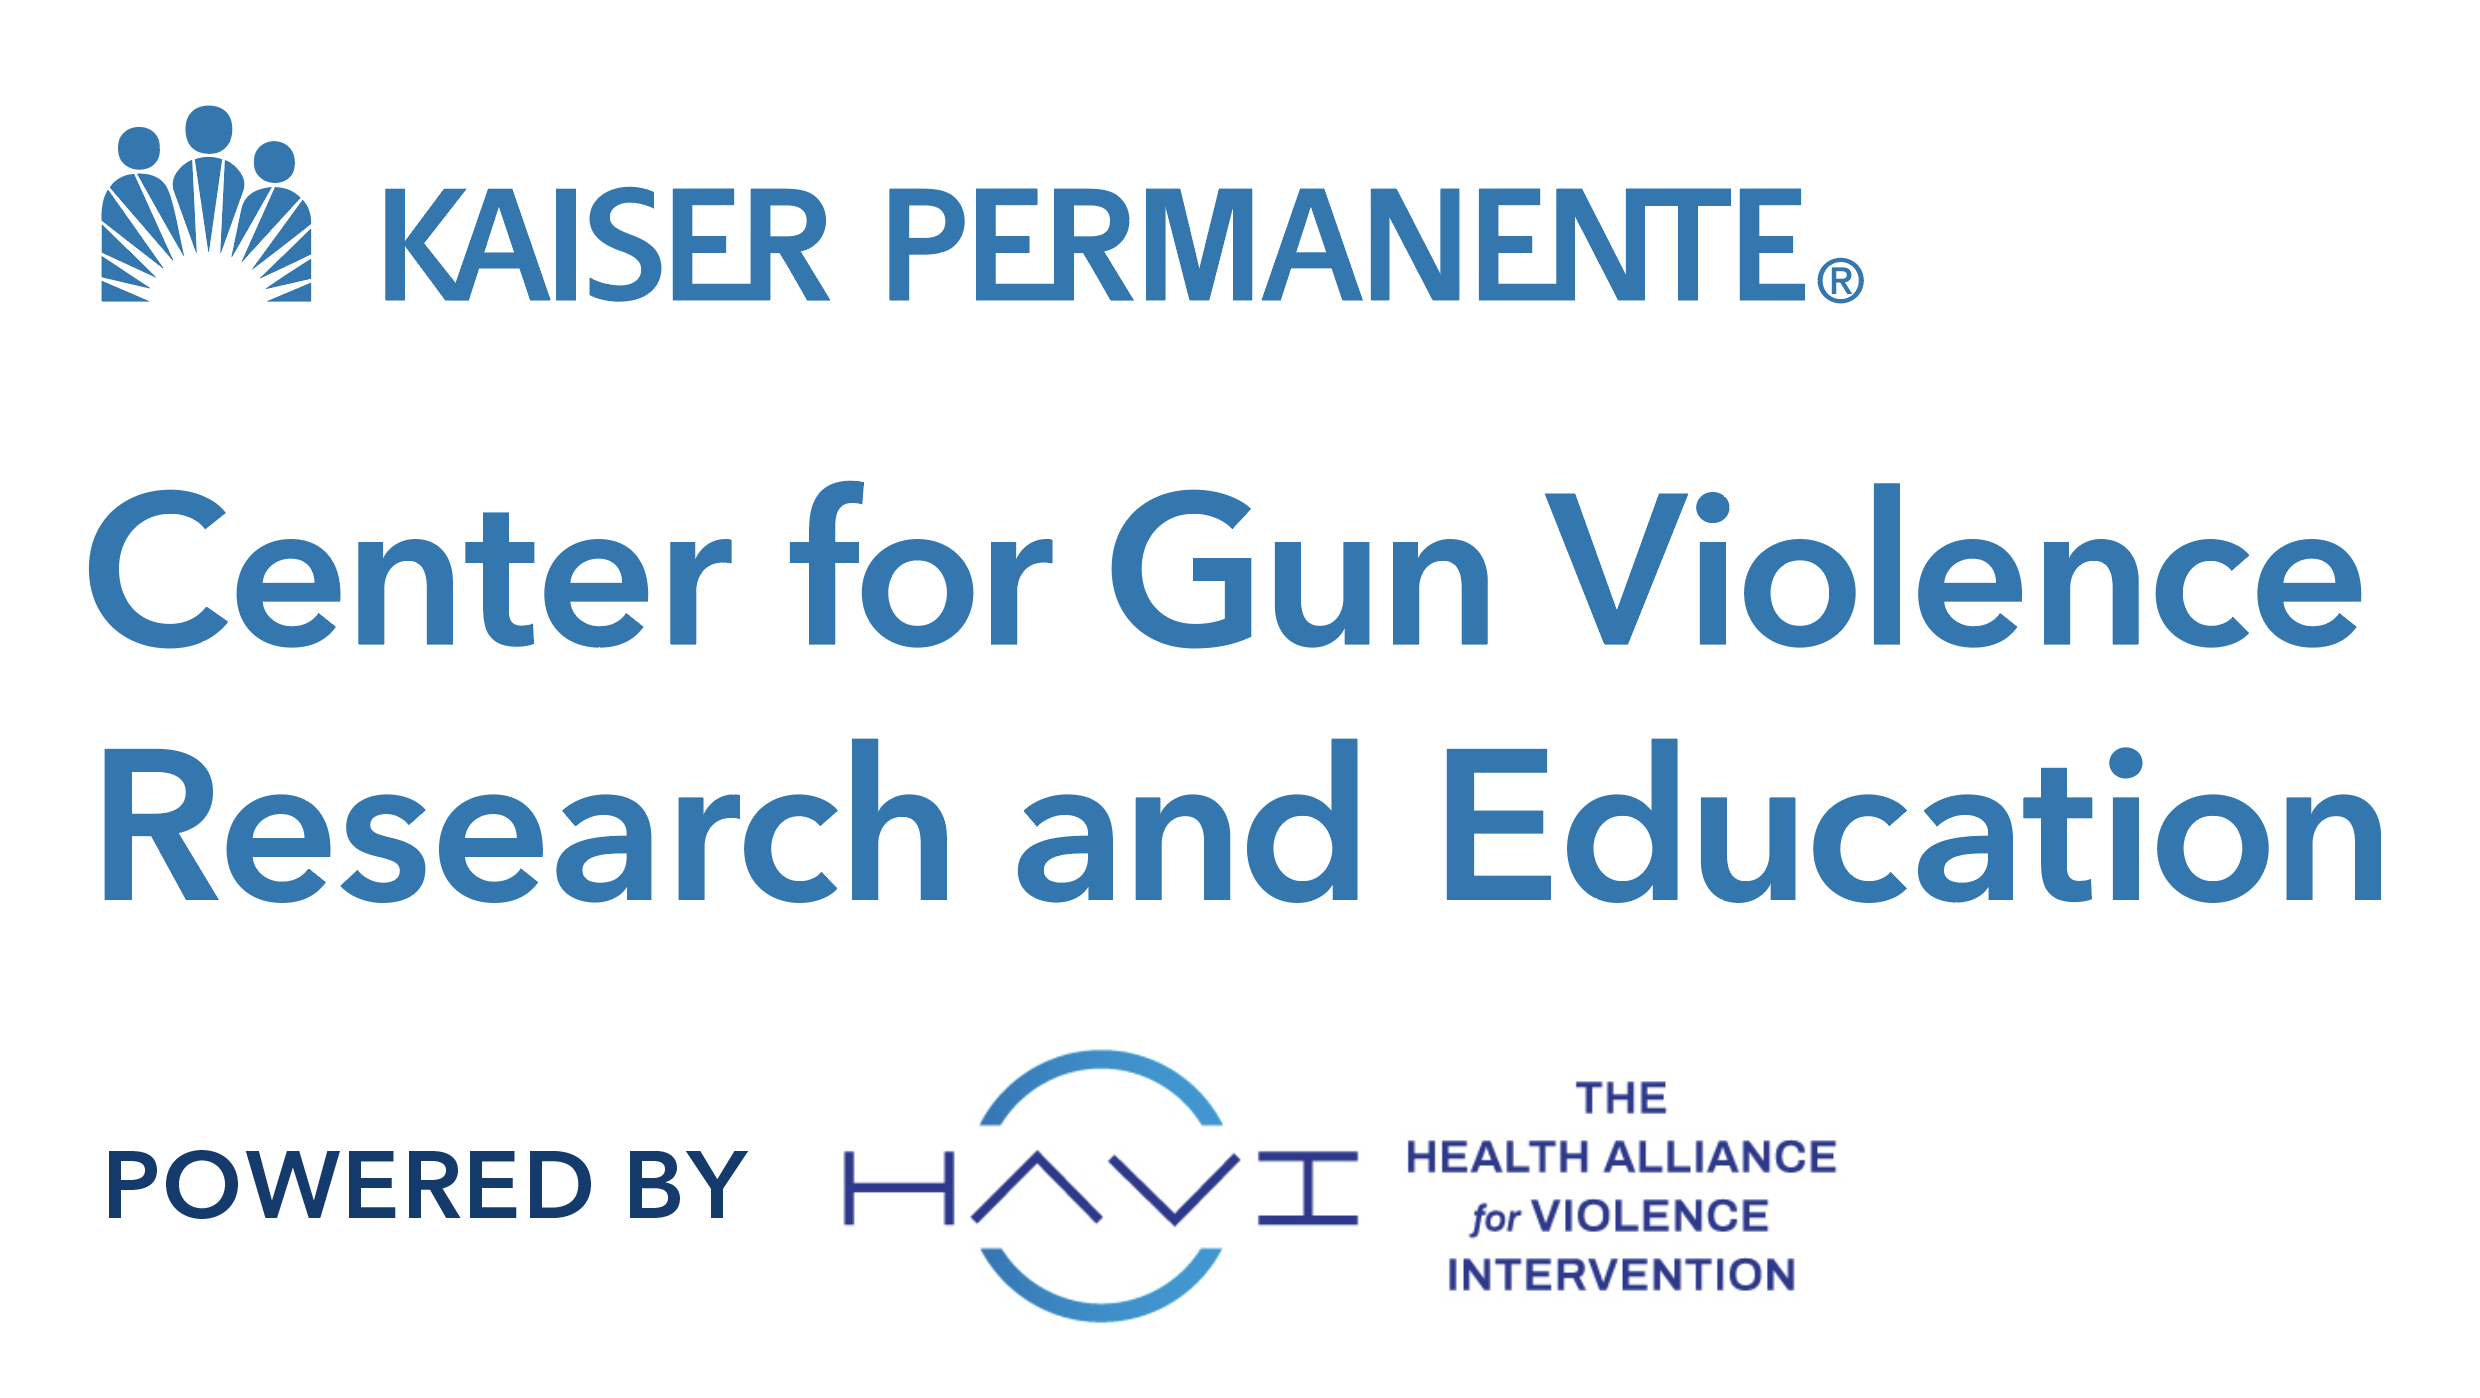 Co-sponsored by Kaiser Permanente Center for Gun Violence Research and Education